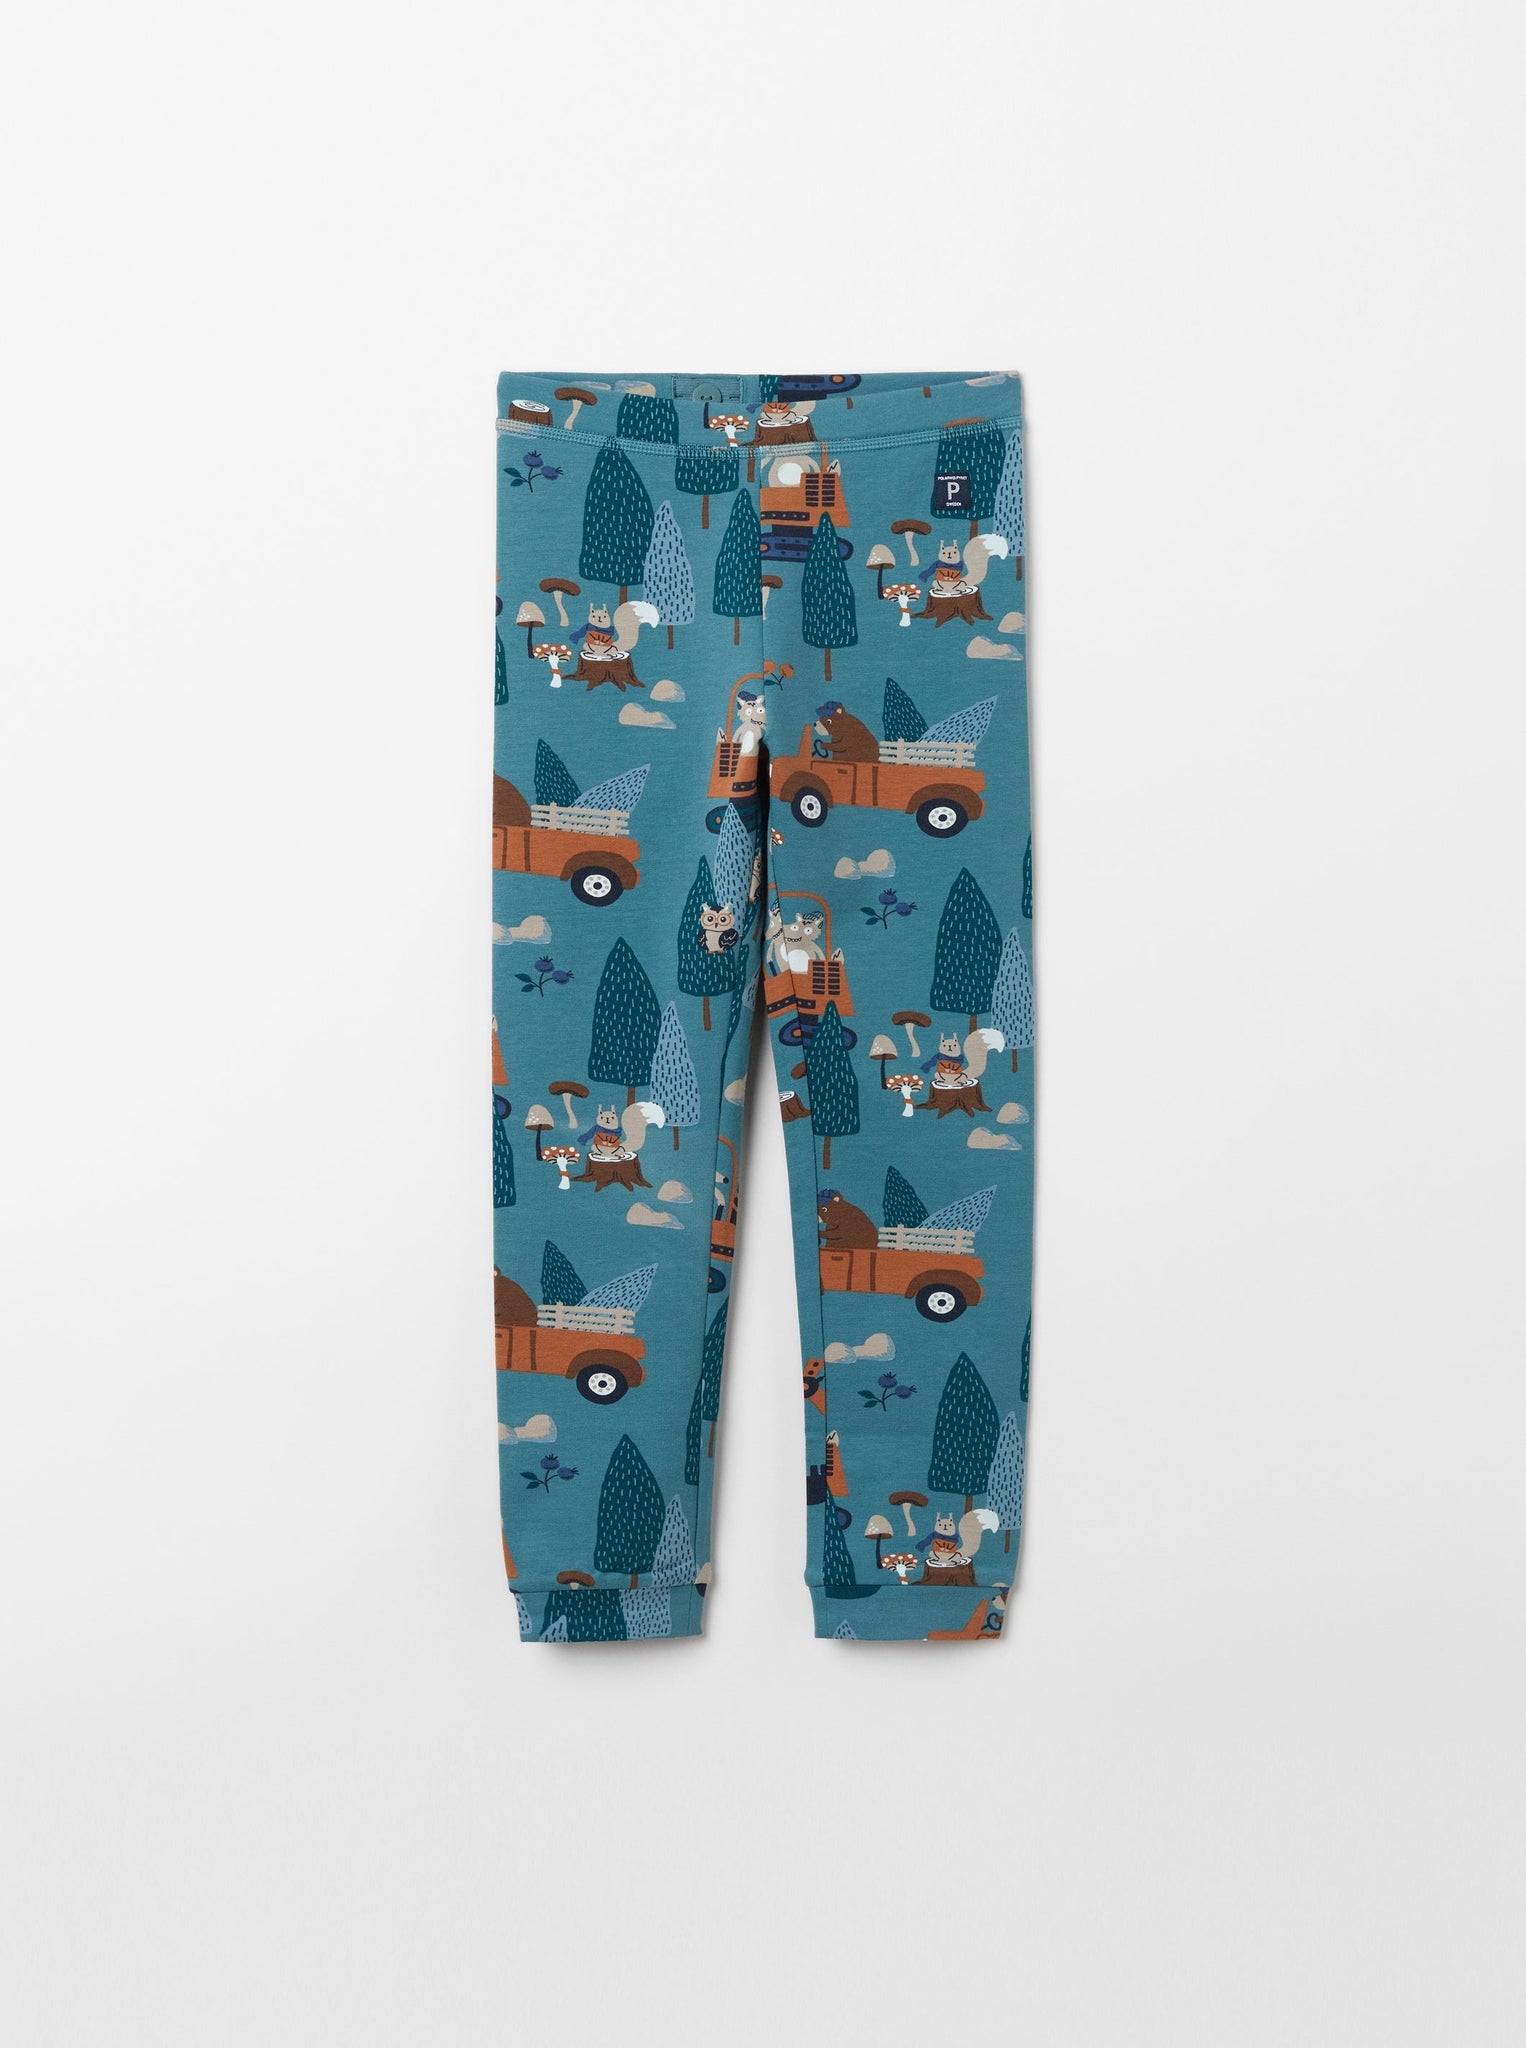 Nordic Blue Kids Leggings from the Polarn O. Pyret kidswear collection. Ethically produced kids clothing.